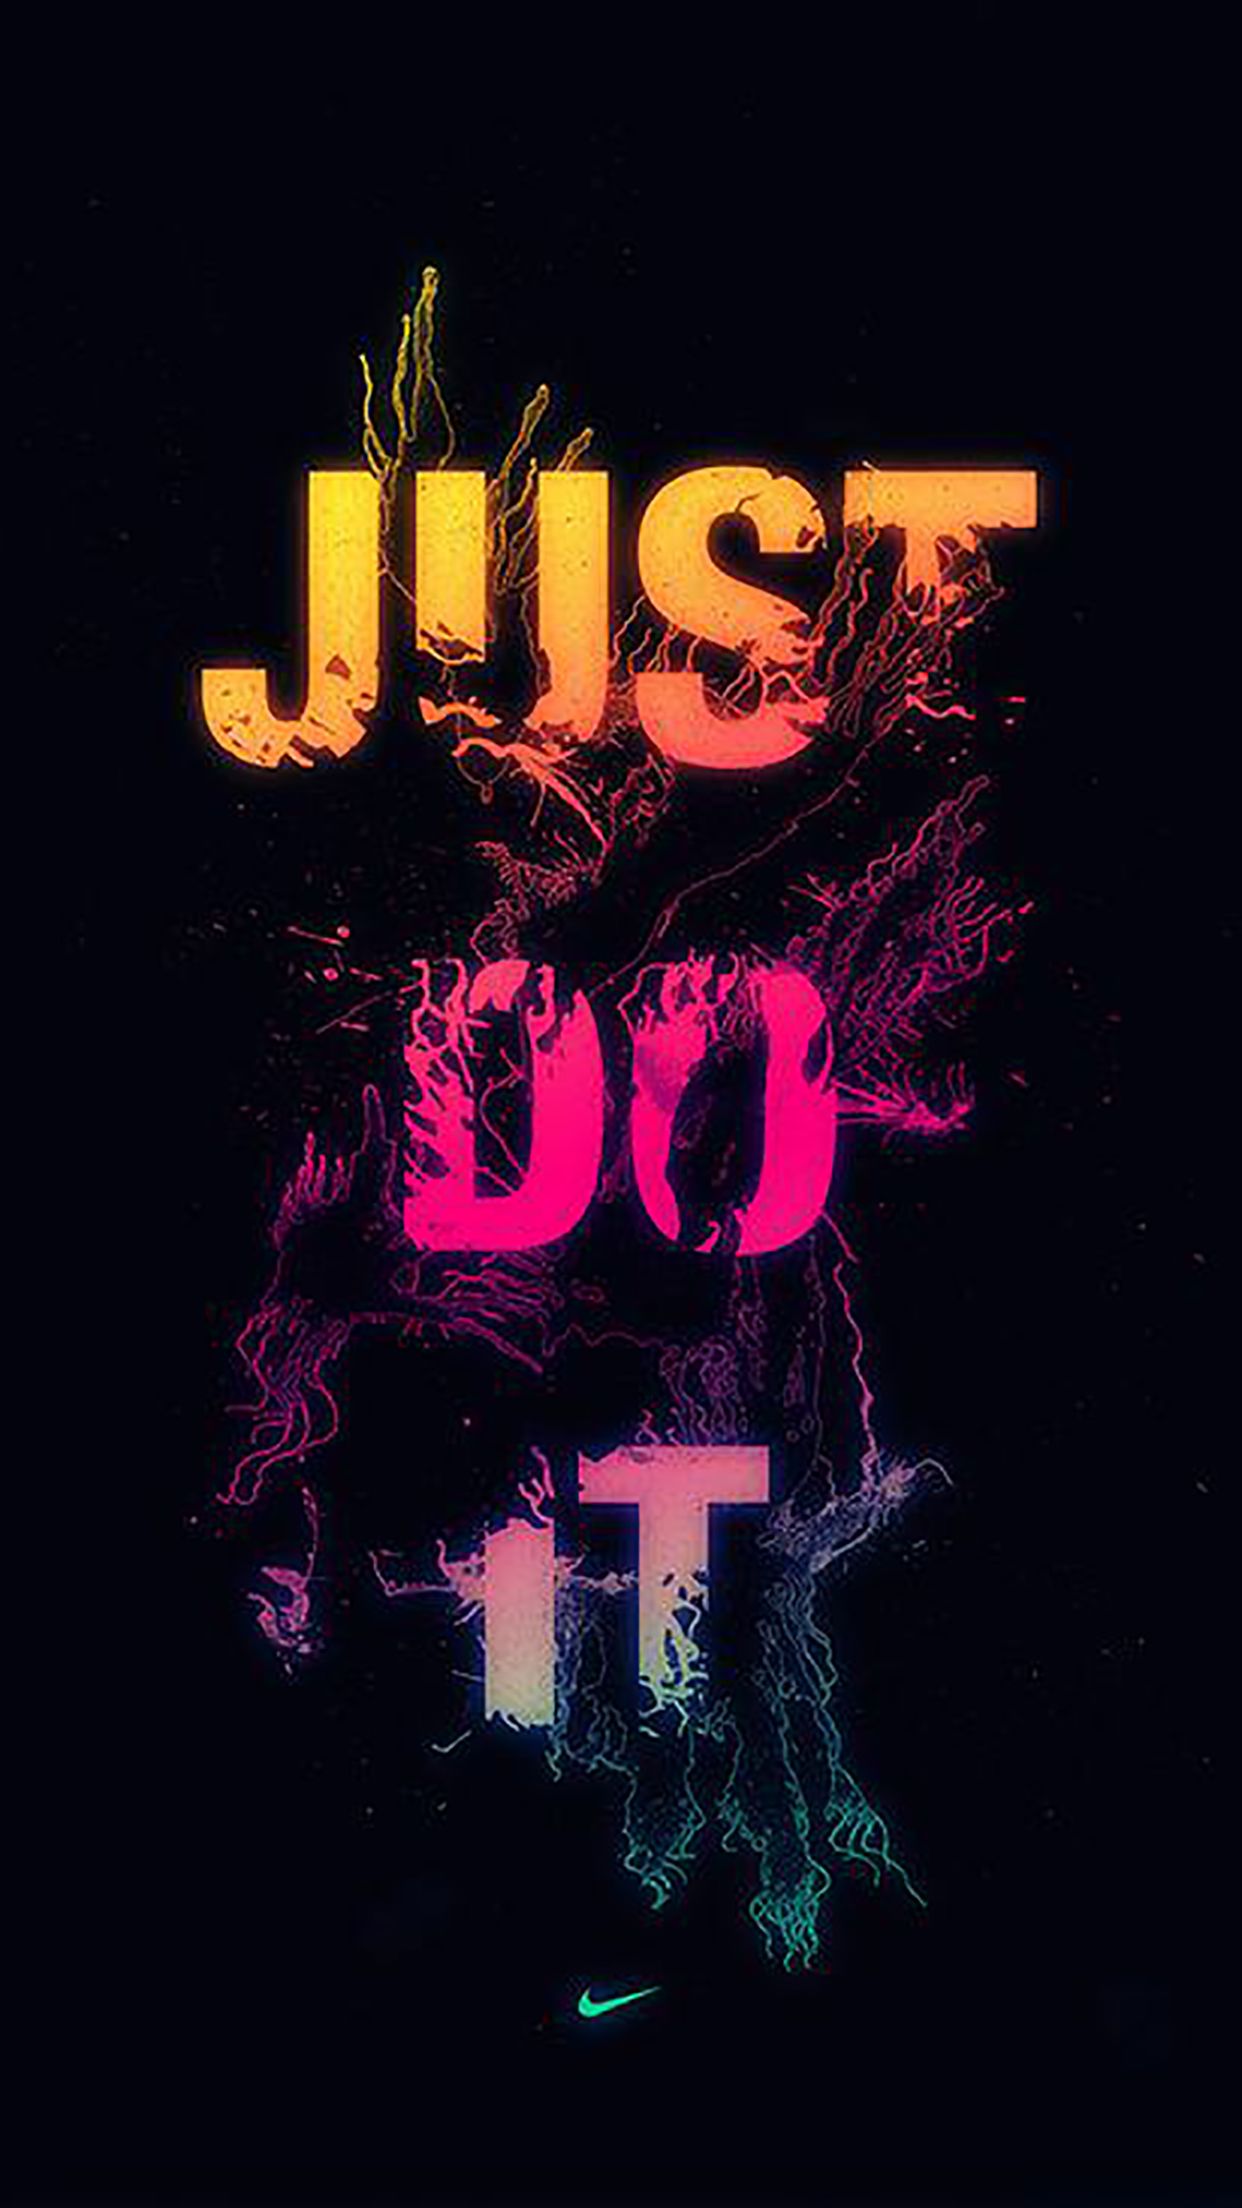 Just do it wallpaper for apple Iphone